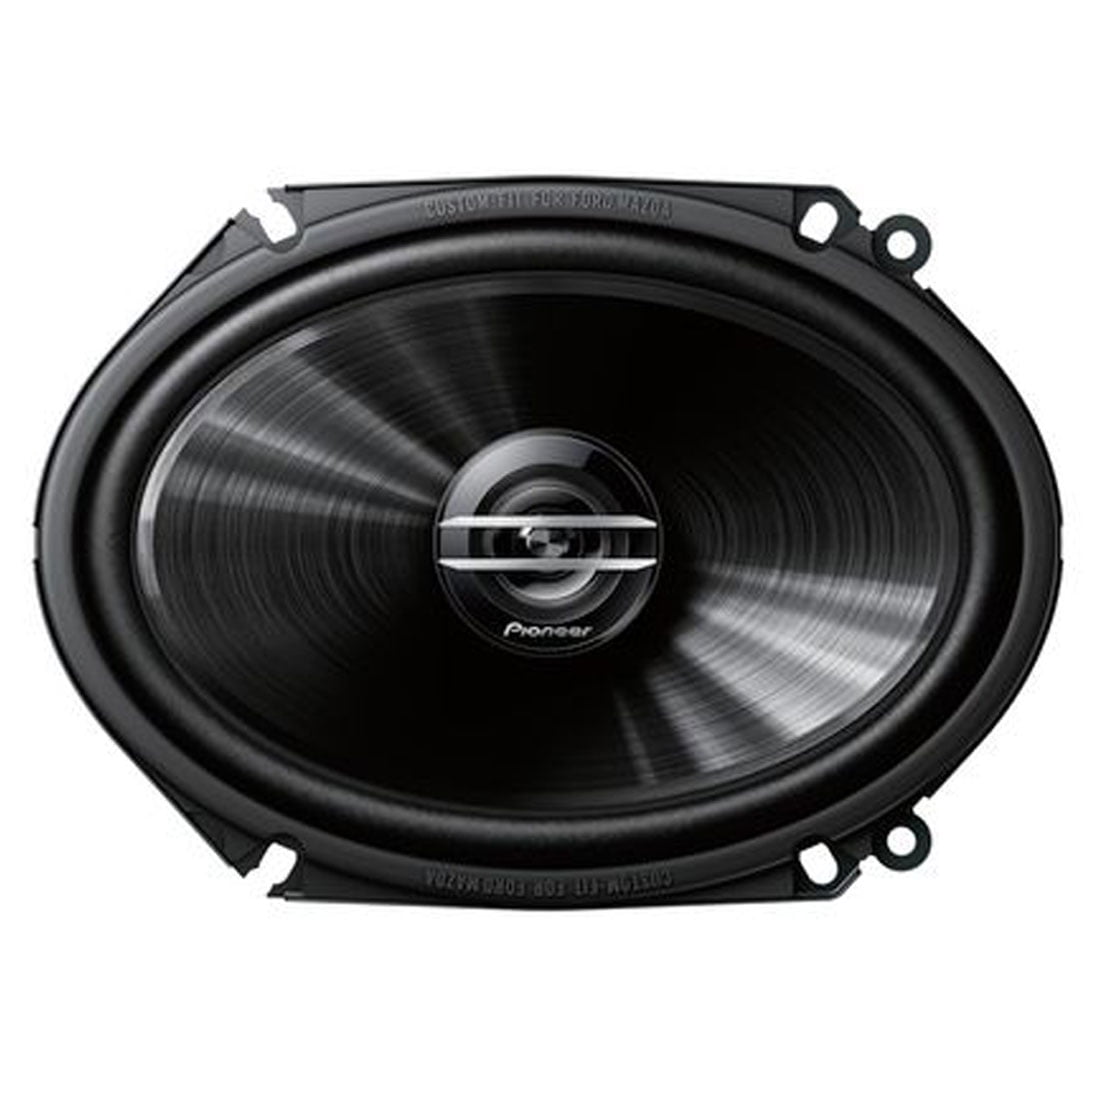 Pioneer TS-G6820S 6x8" 2-Way Coaxial Car Speakers